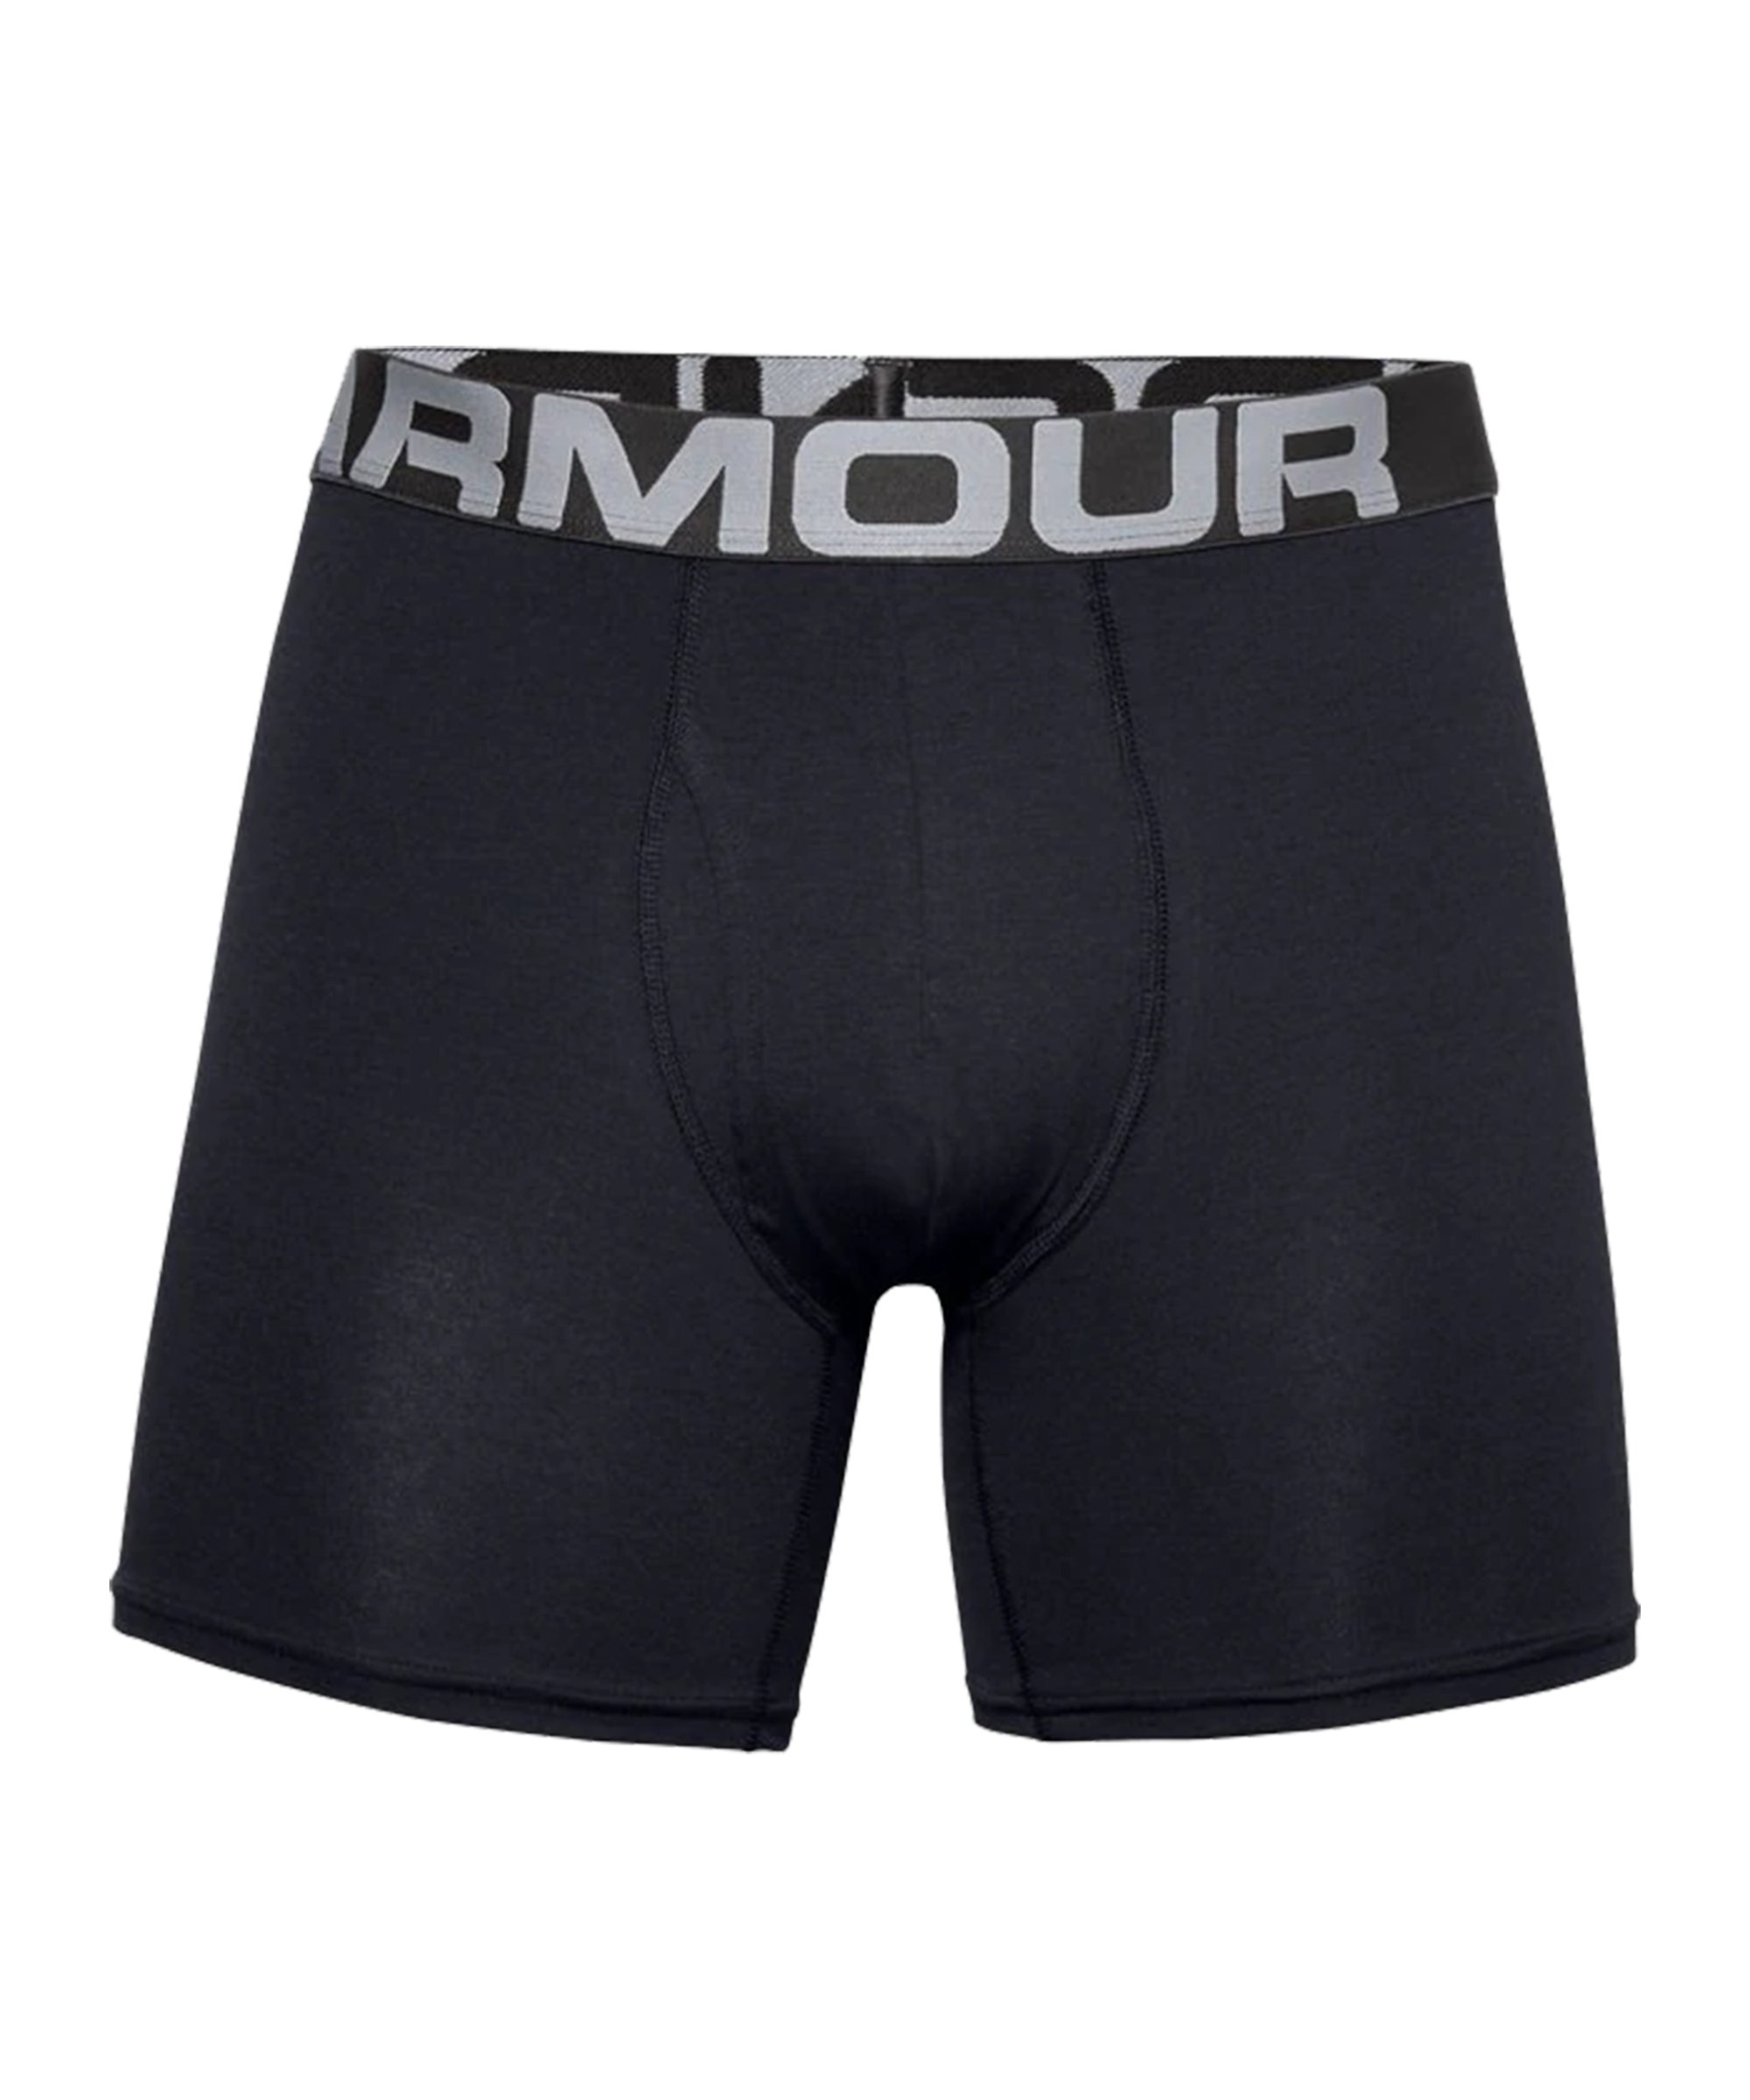 Under Armour Charged Boxer 6in 3er Pack F001 - schwarz